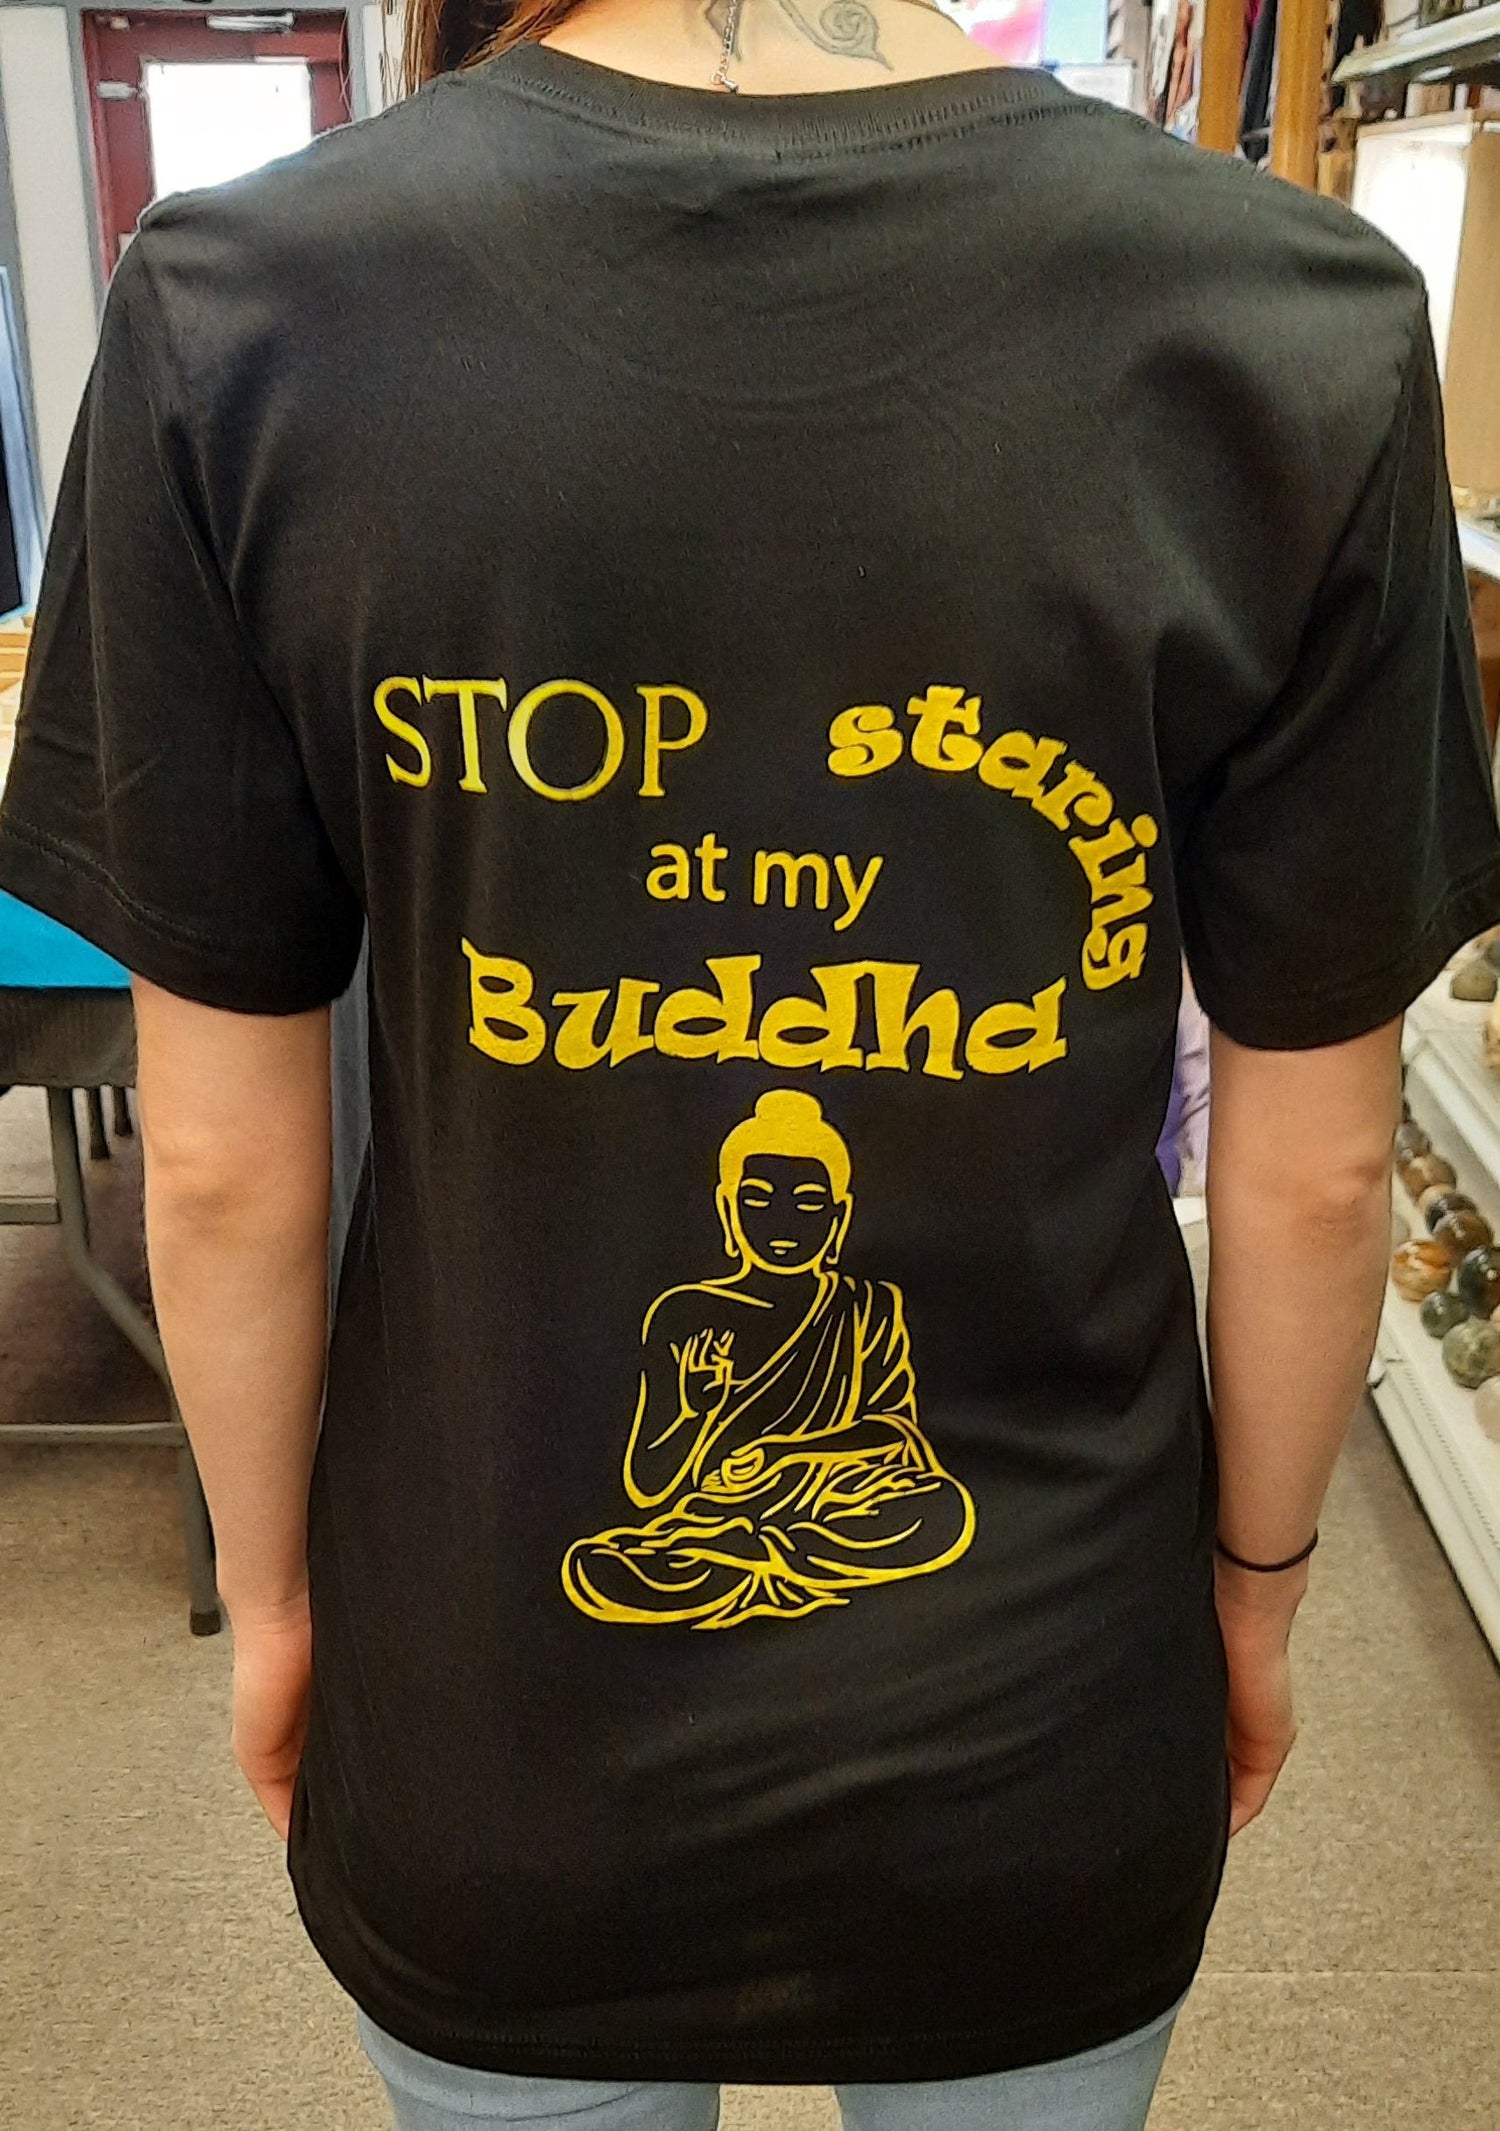 Bella Canvas short sleeve T-Shirts, size XL.  "Stop staring at my Buddha" on the back, Gaia's Blessings LLC logo on front.